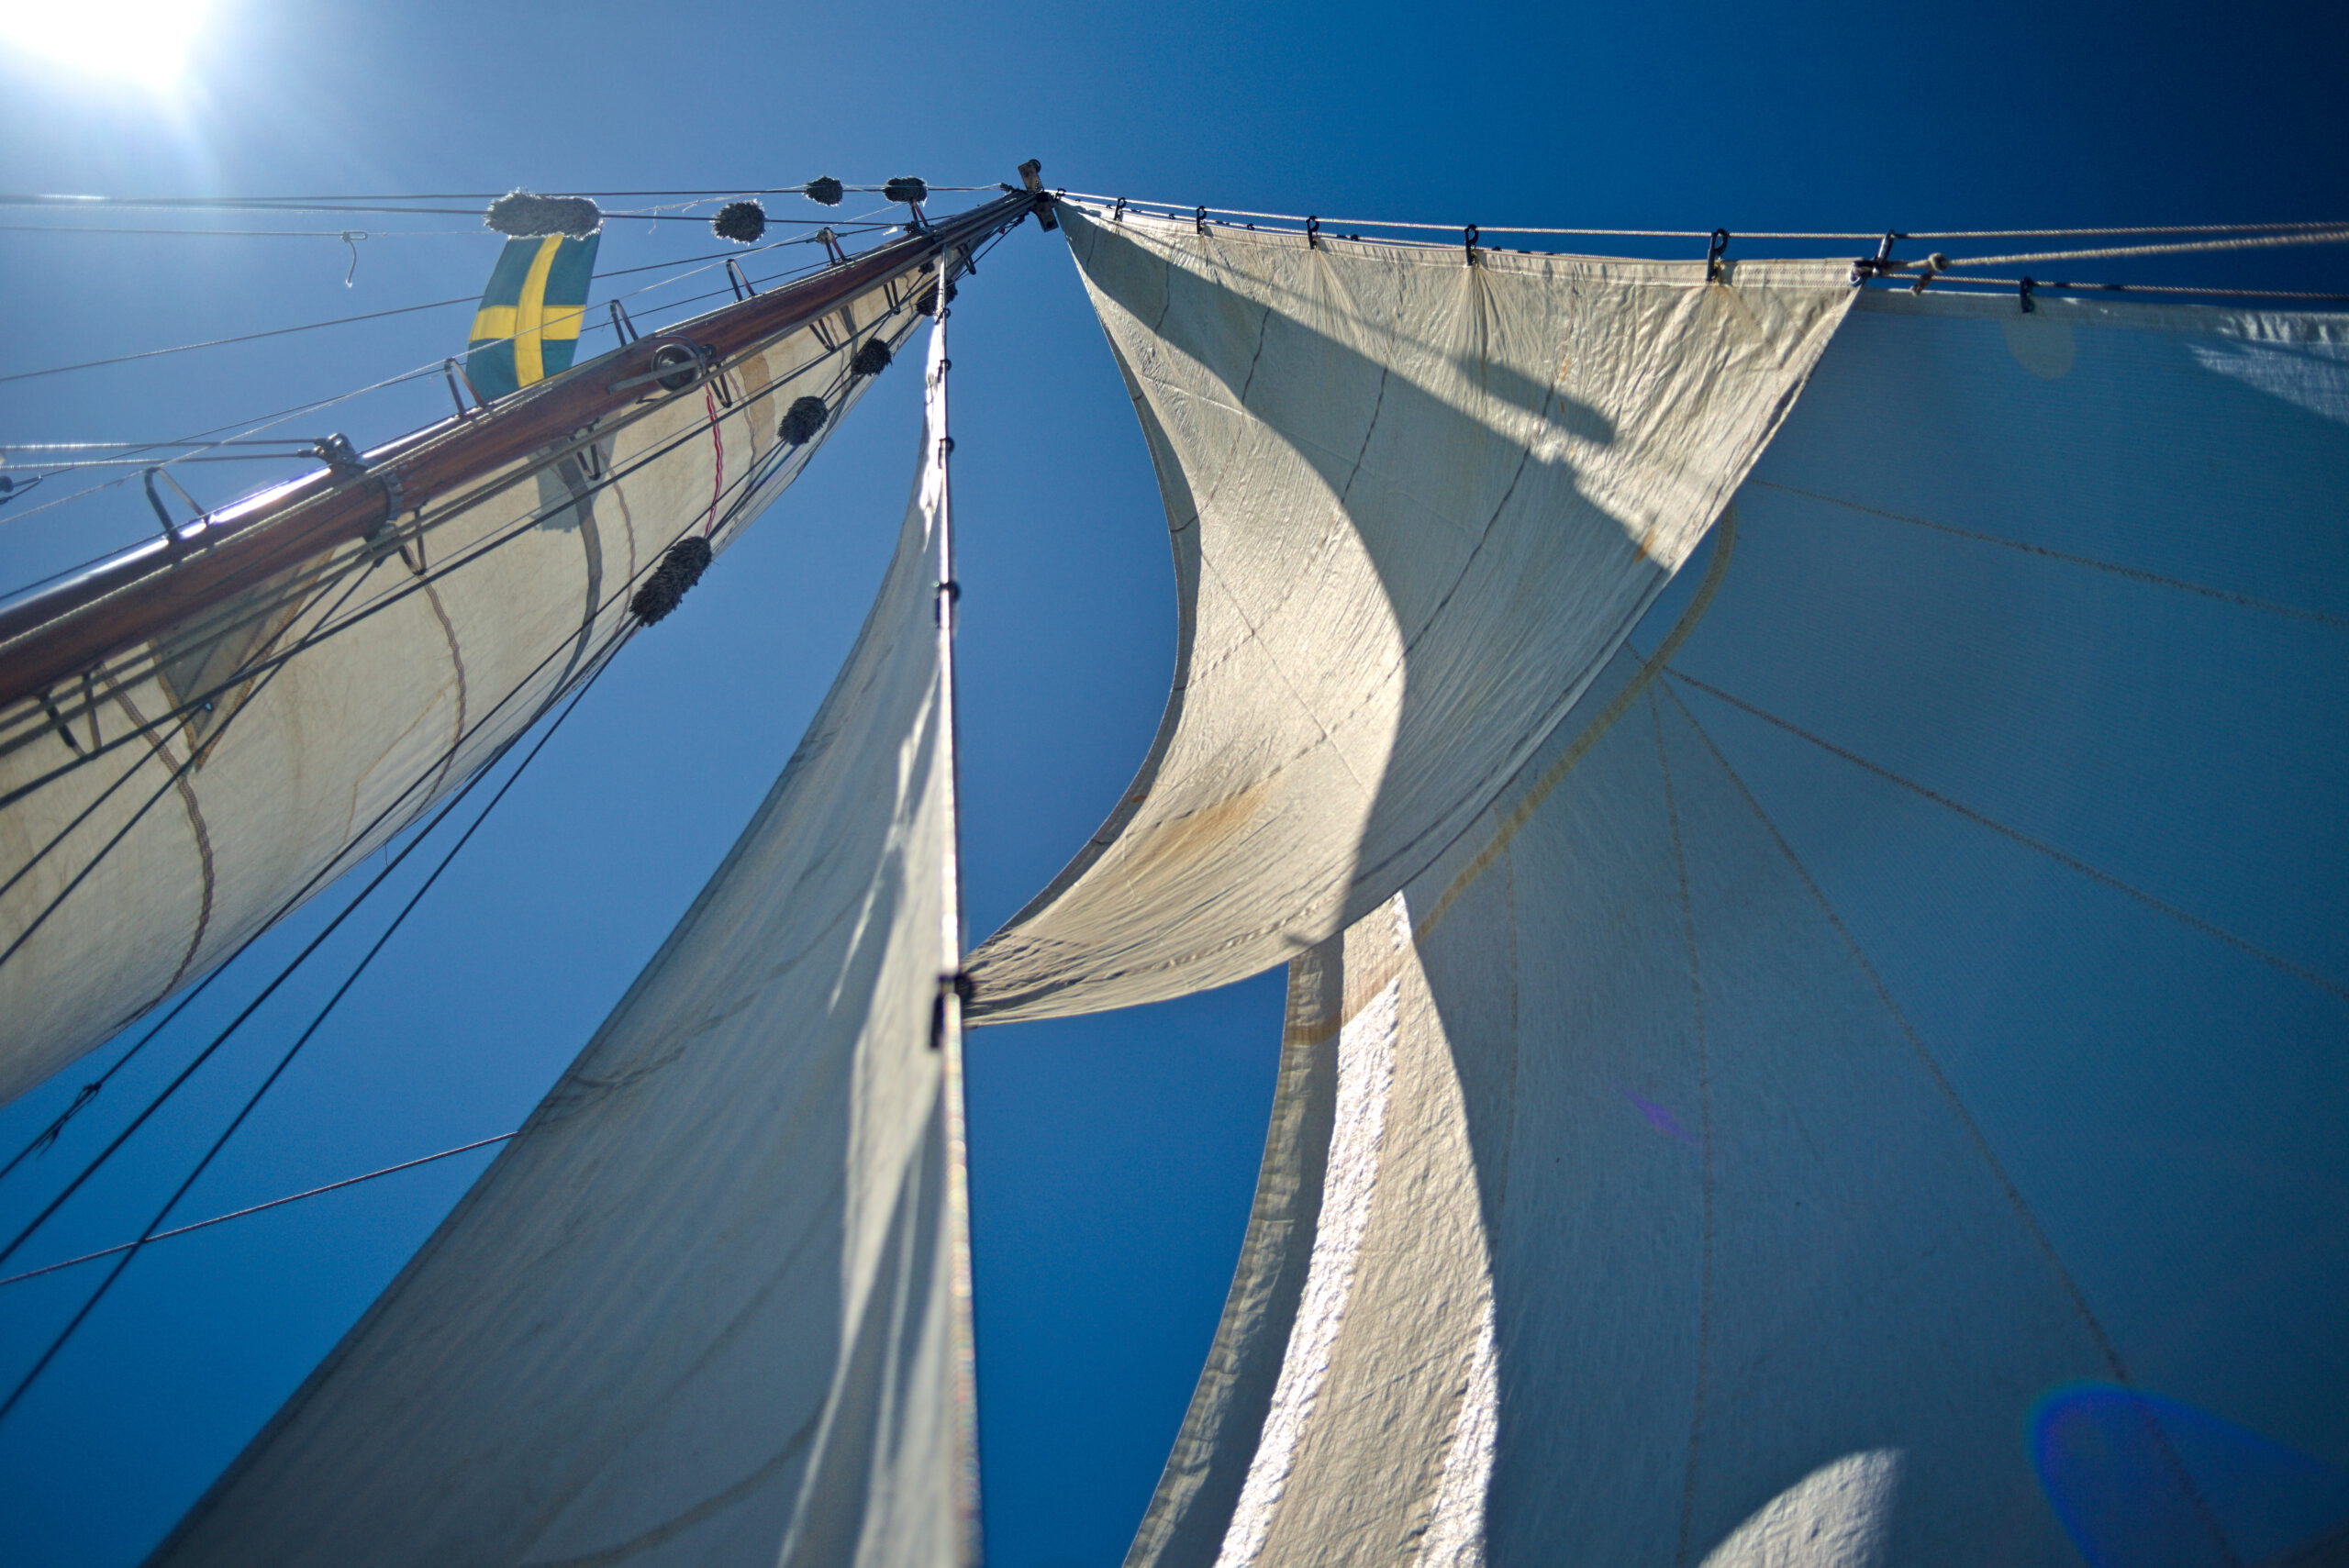 One full week of sailing and reaching Gotland without engine